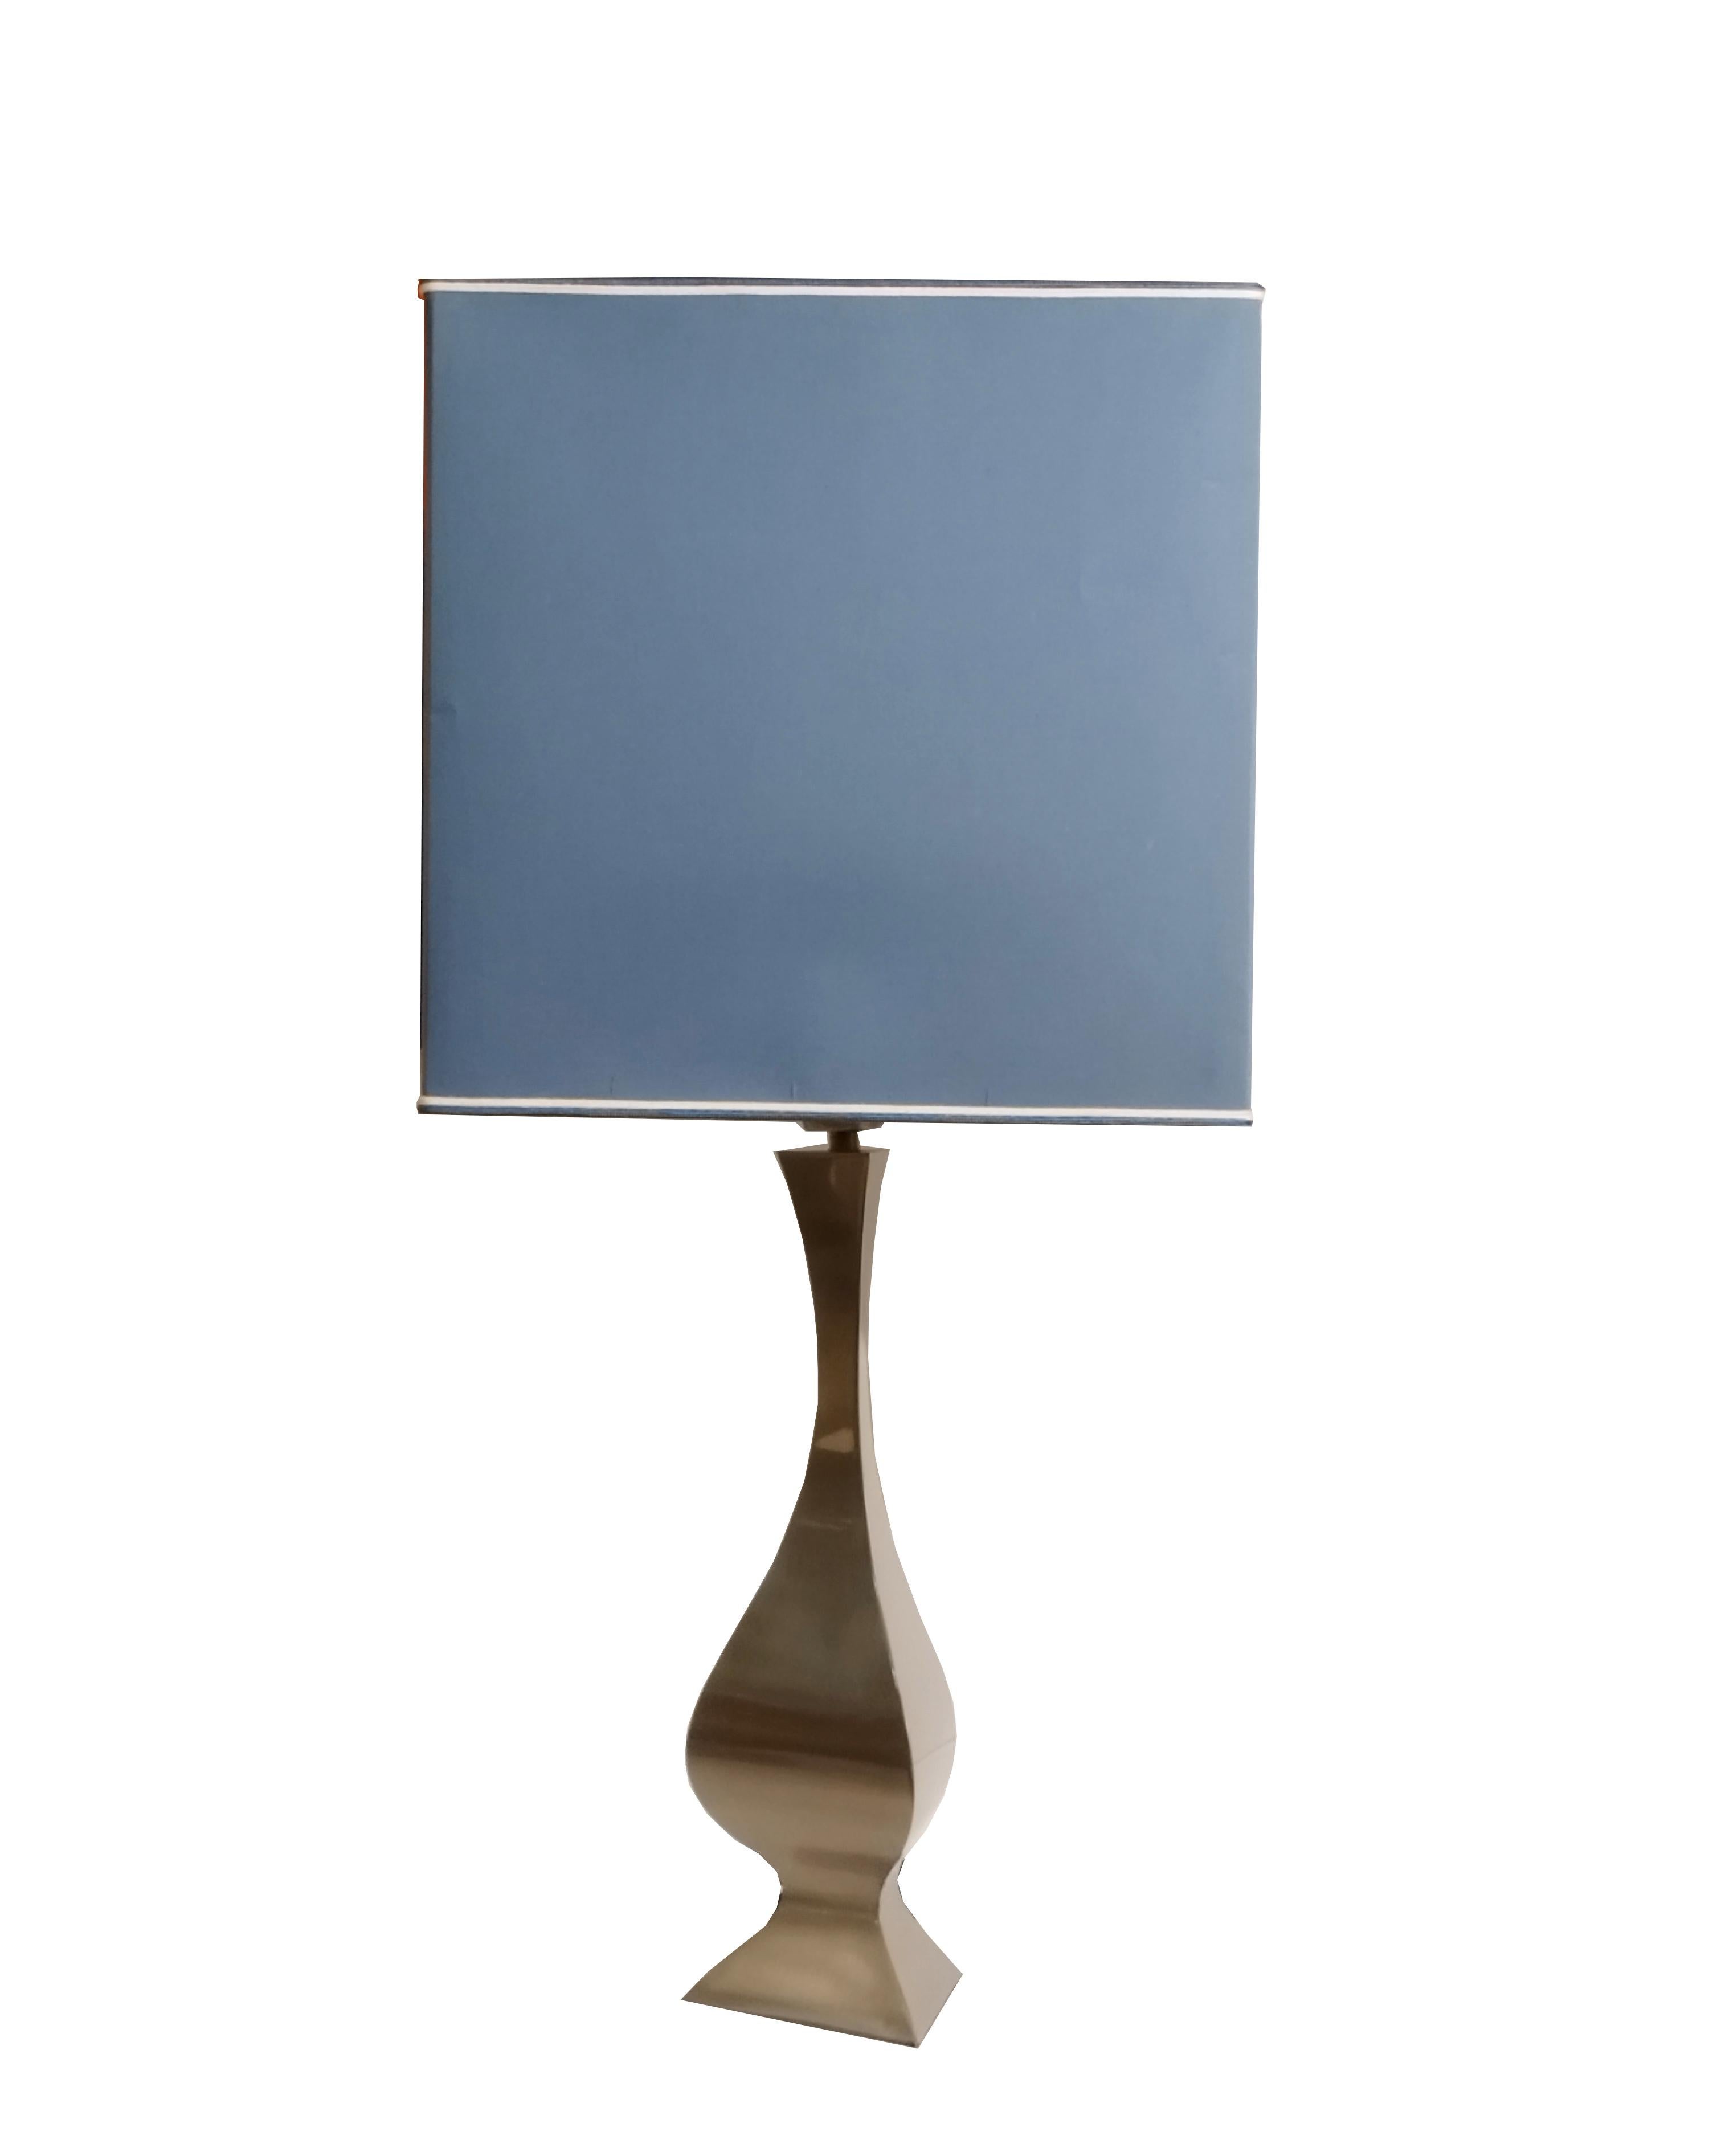 Table lamp designed by Tonello and Montagna Grillo for High Society 1970s. Nickel-plated brass and elegant fabric shade.